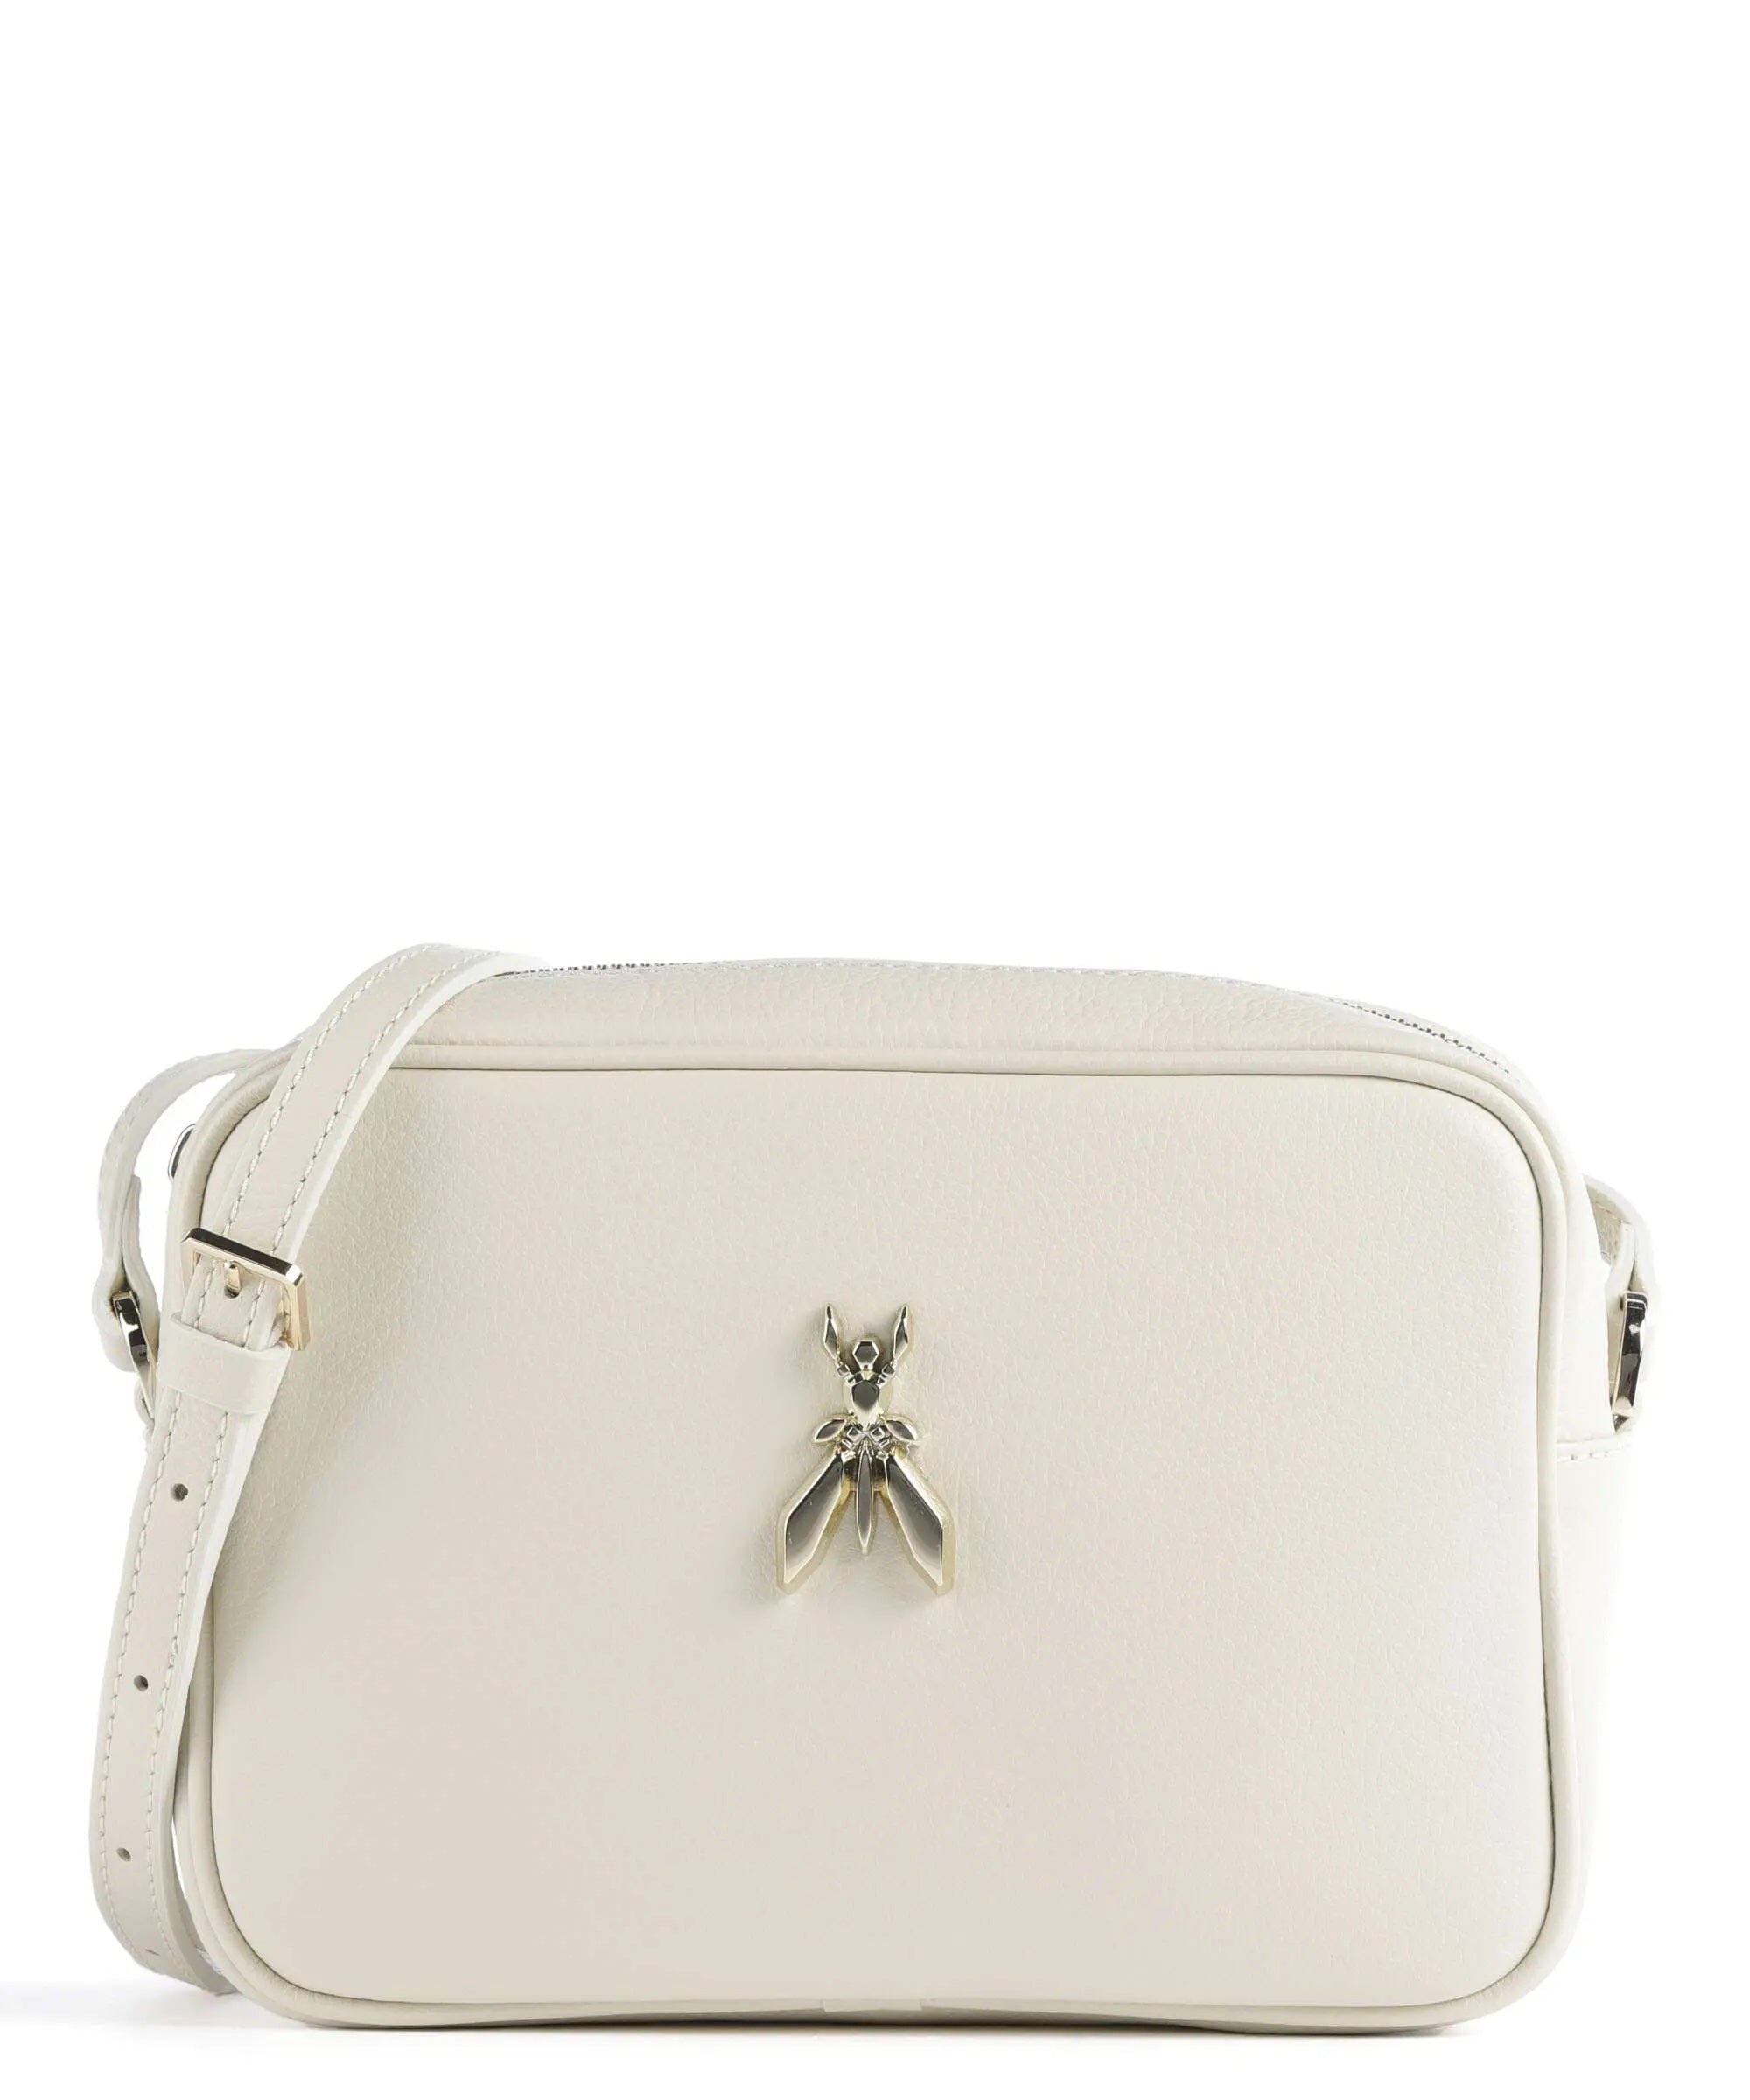 Fly Bag leather crossbody bag off white